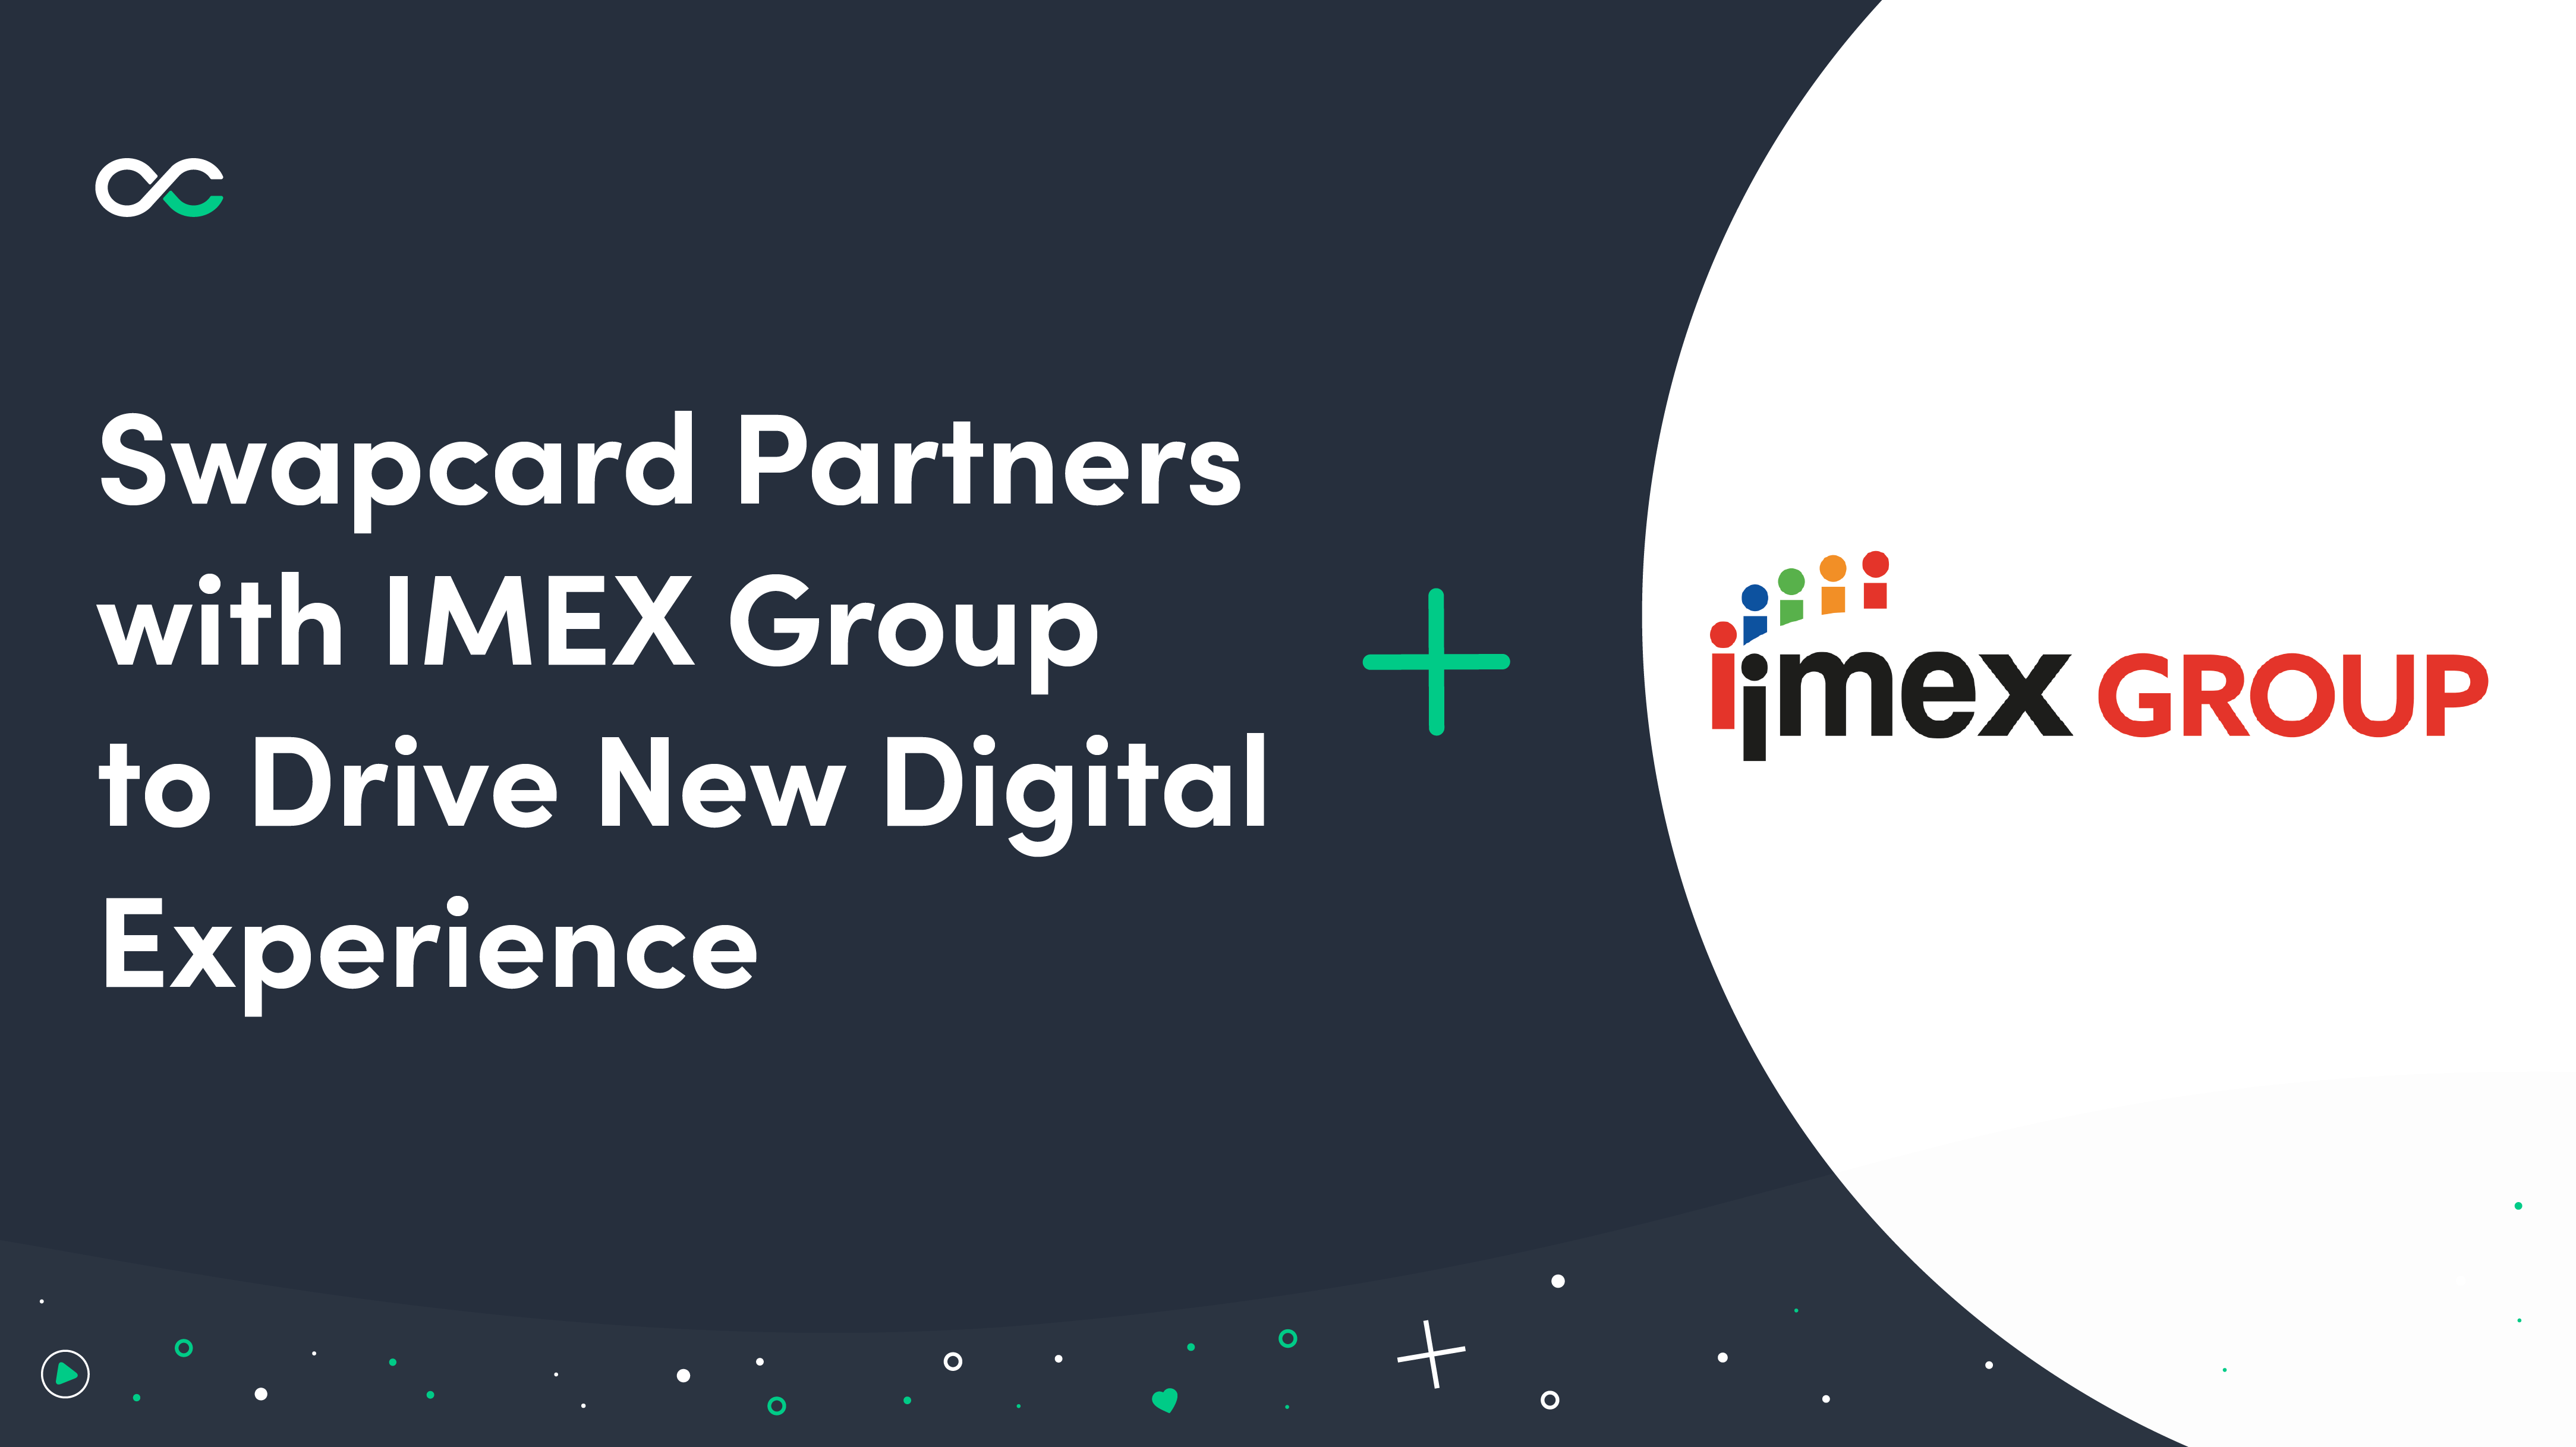 Swapcard Partners with IMEX Group to Drive New Digital Experience